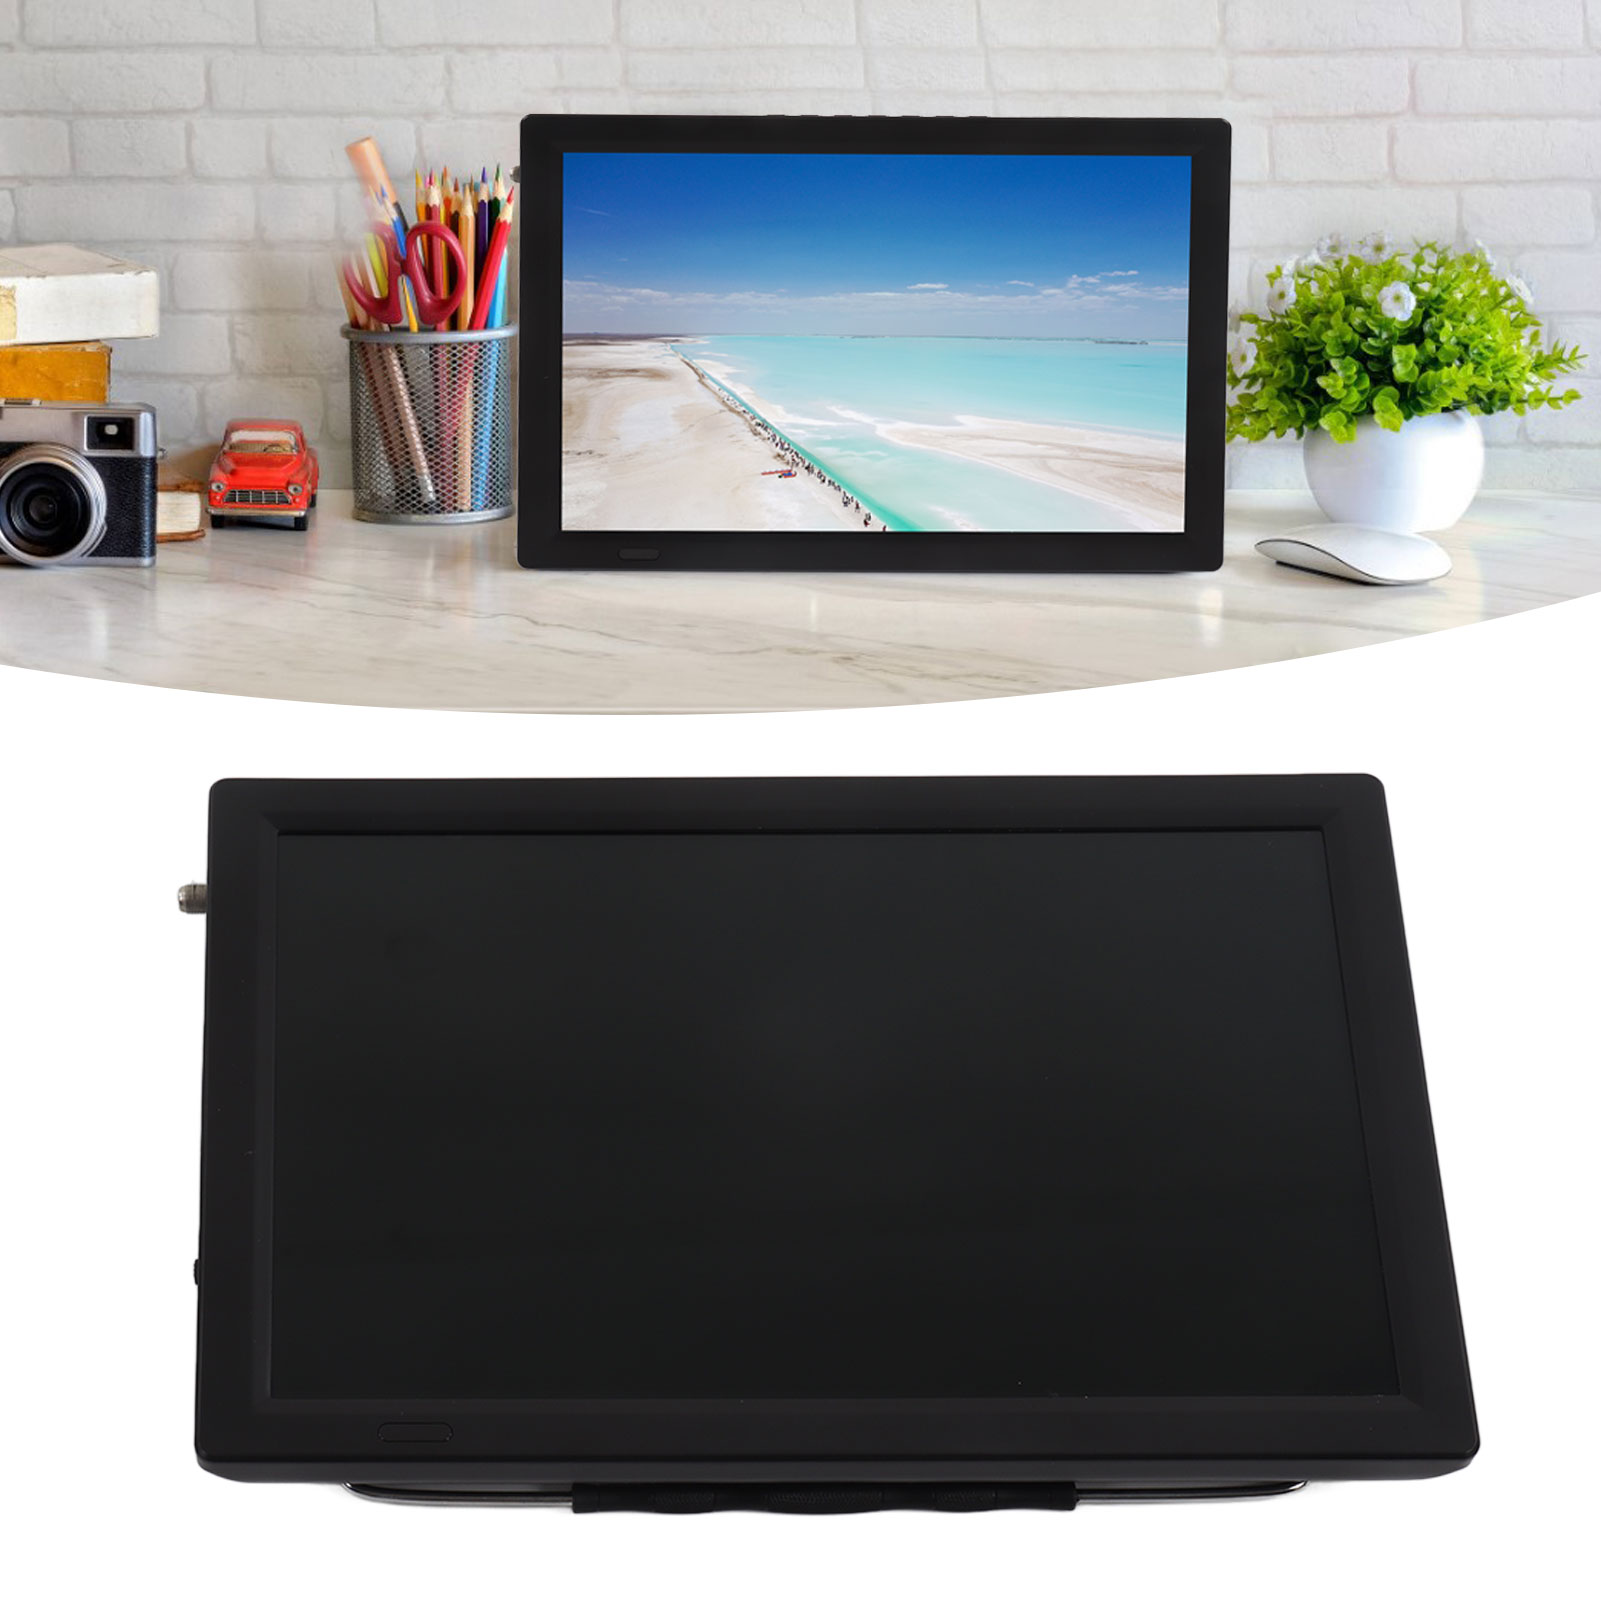 14 Inch Portable Tv Portable Tv Lcd Monitor Rechargeable Portable Tv 14 Inch Portable Digital LED TV On Screen High Sensitivity Rechargeable TV LCD Monitor With Remote Control - image 4 of 8